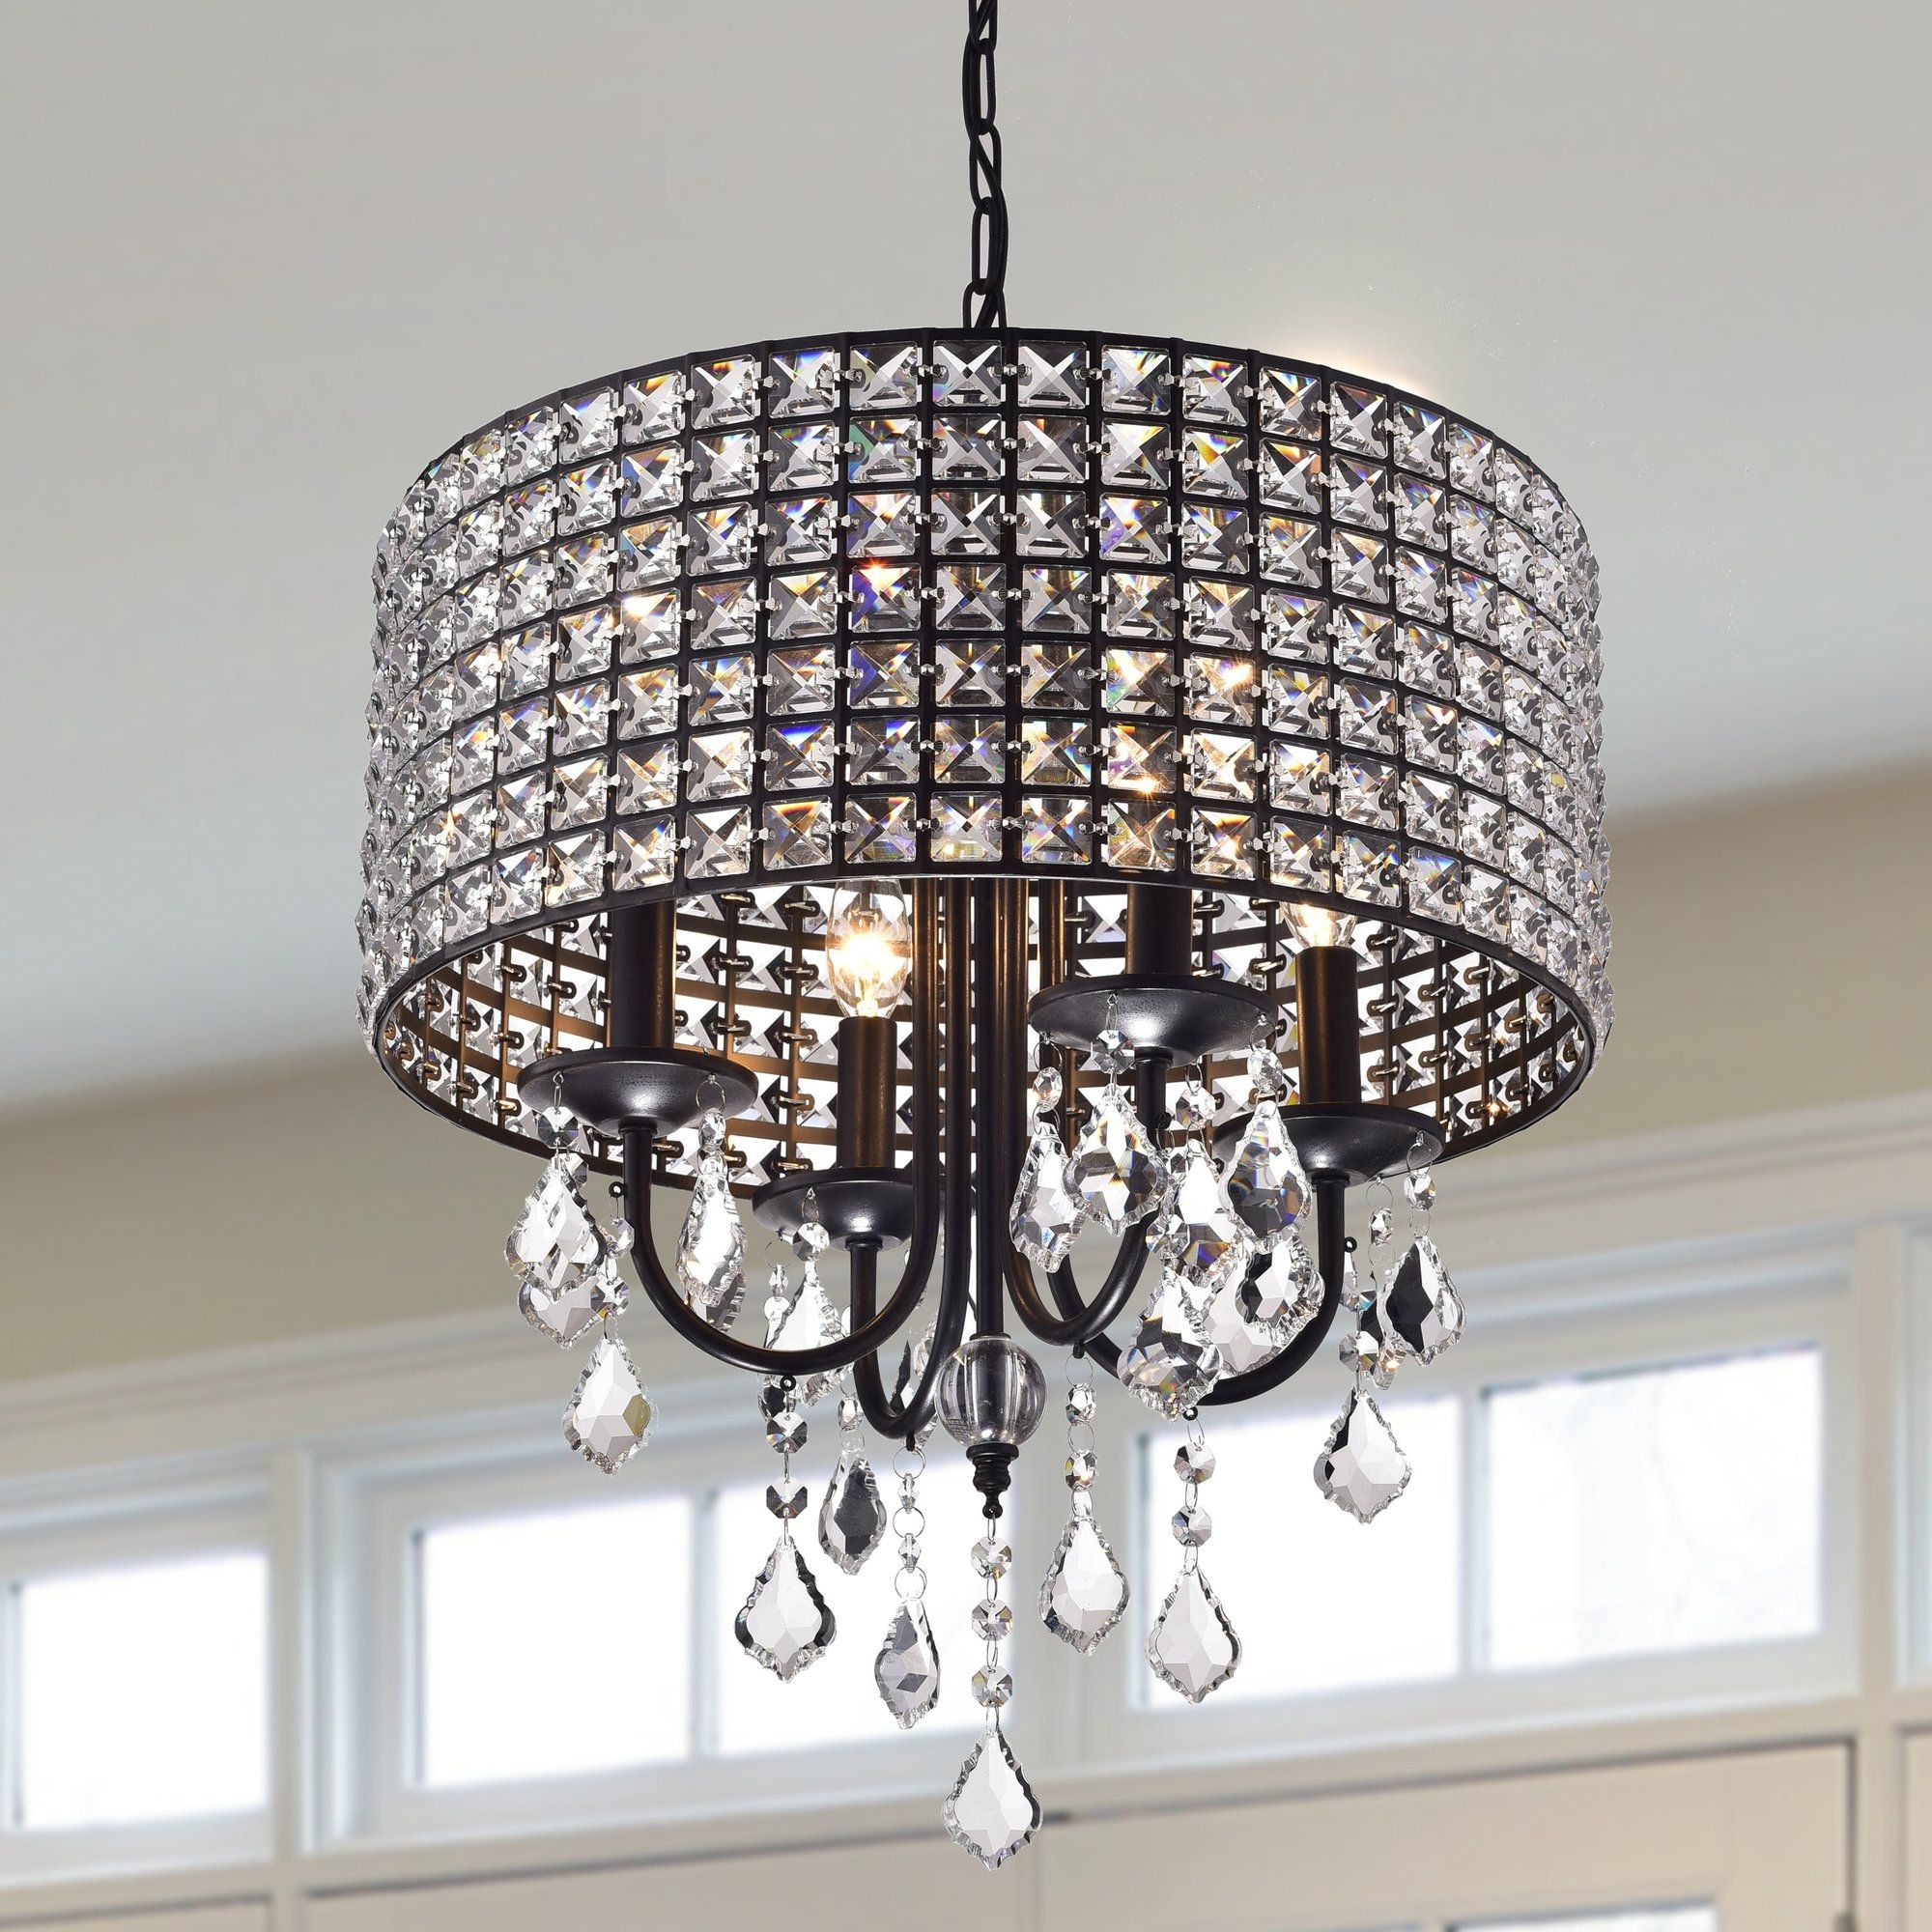 Mini Or Small Chandeliers Youll Love Throughout Small Chandeliers (View 14 of 15)